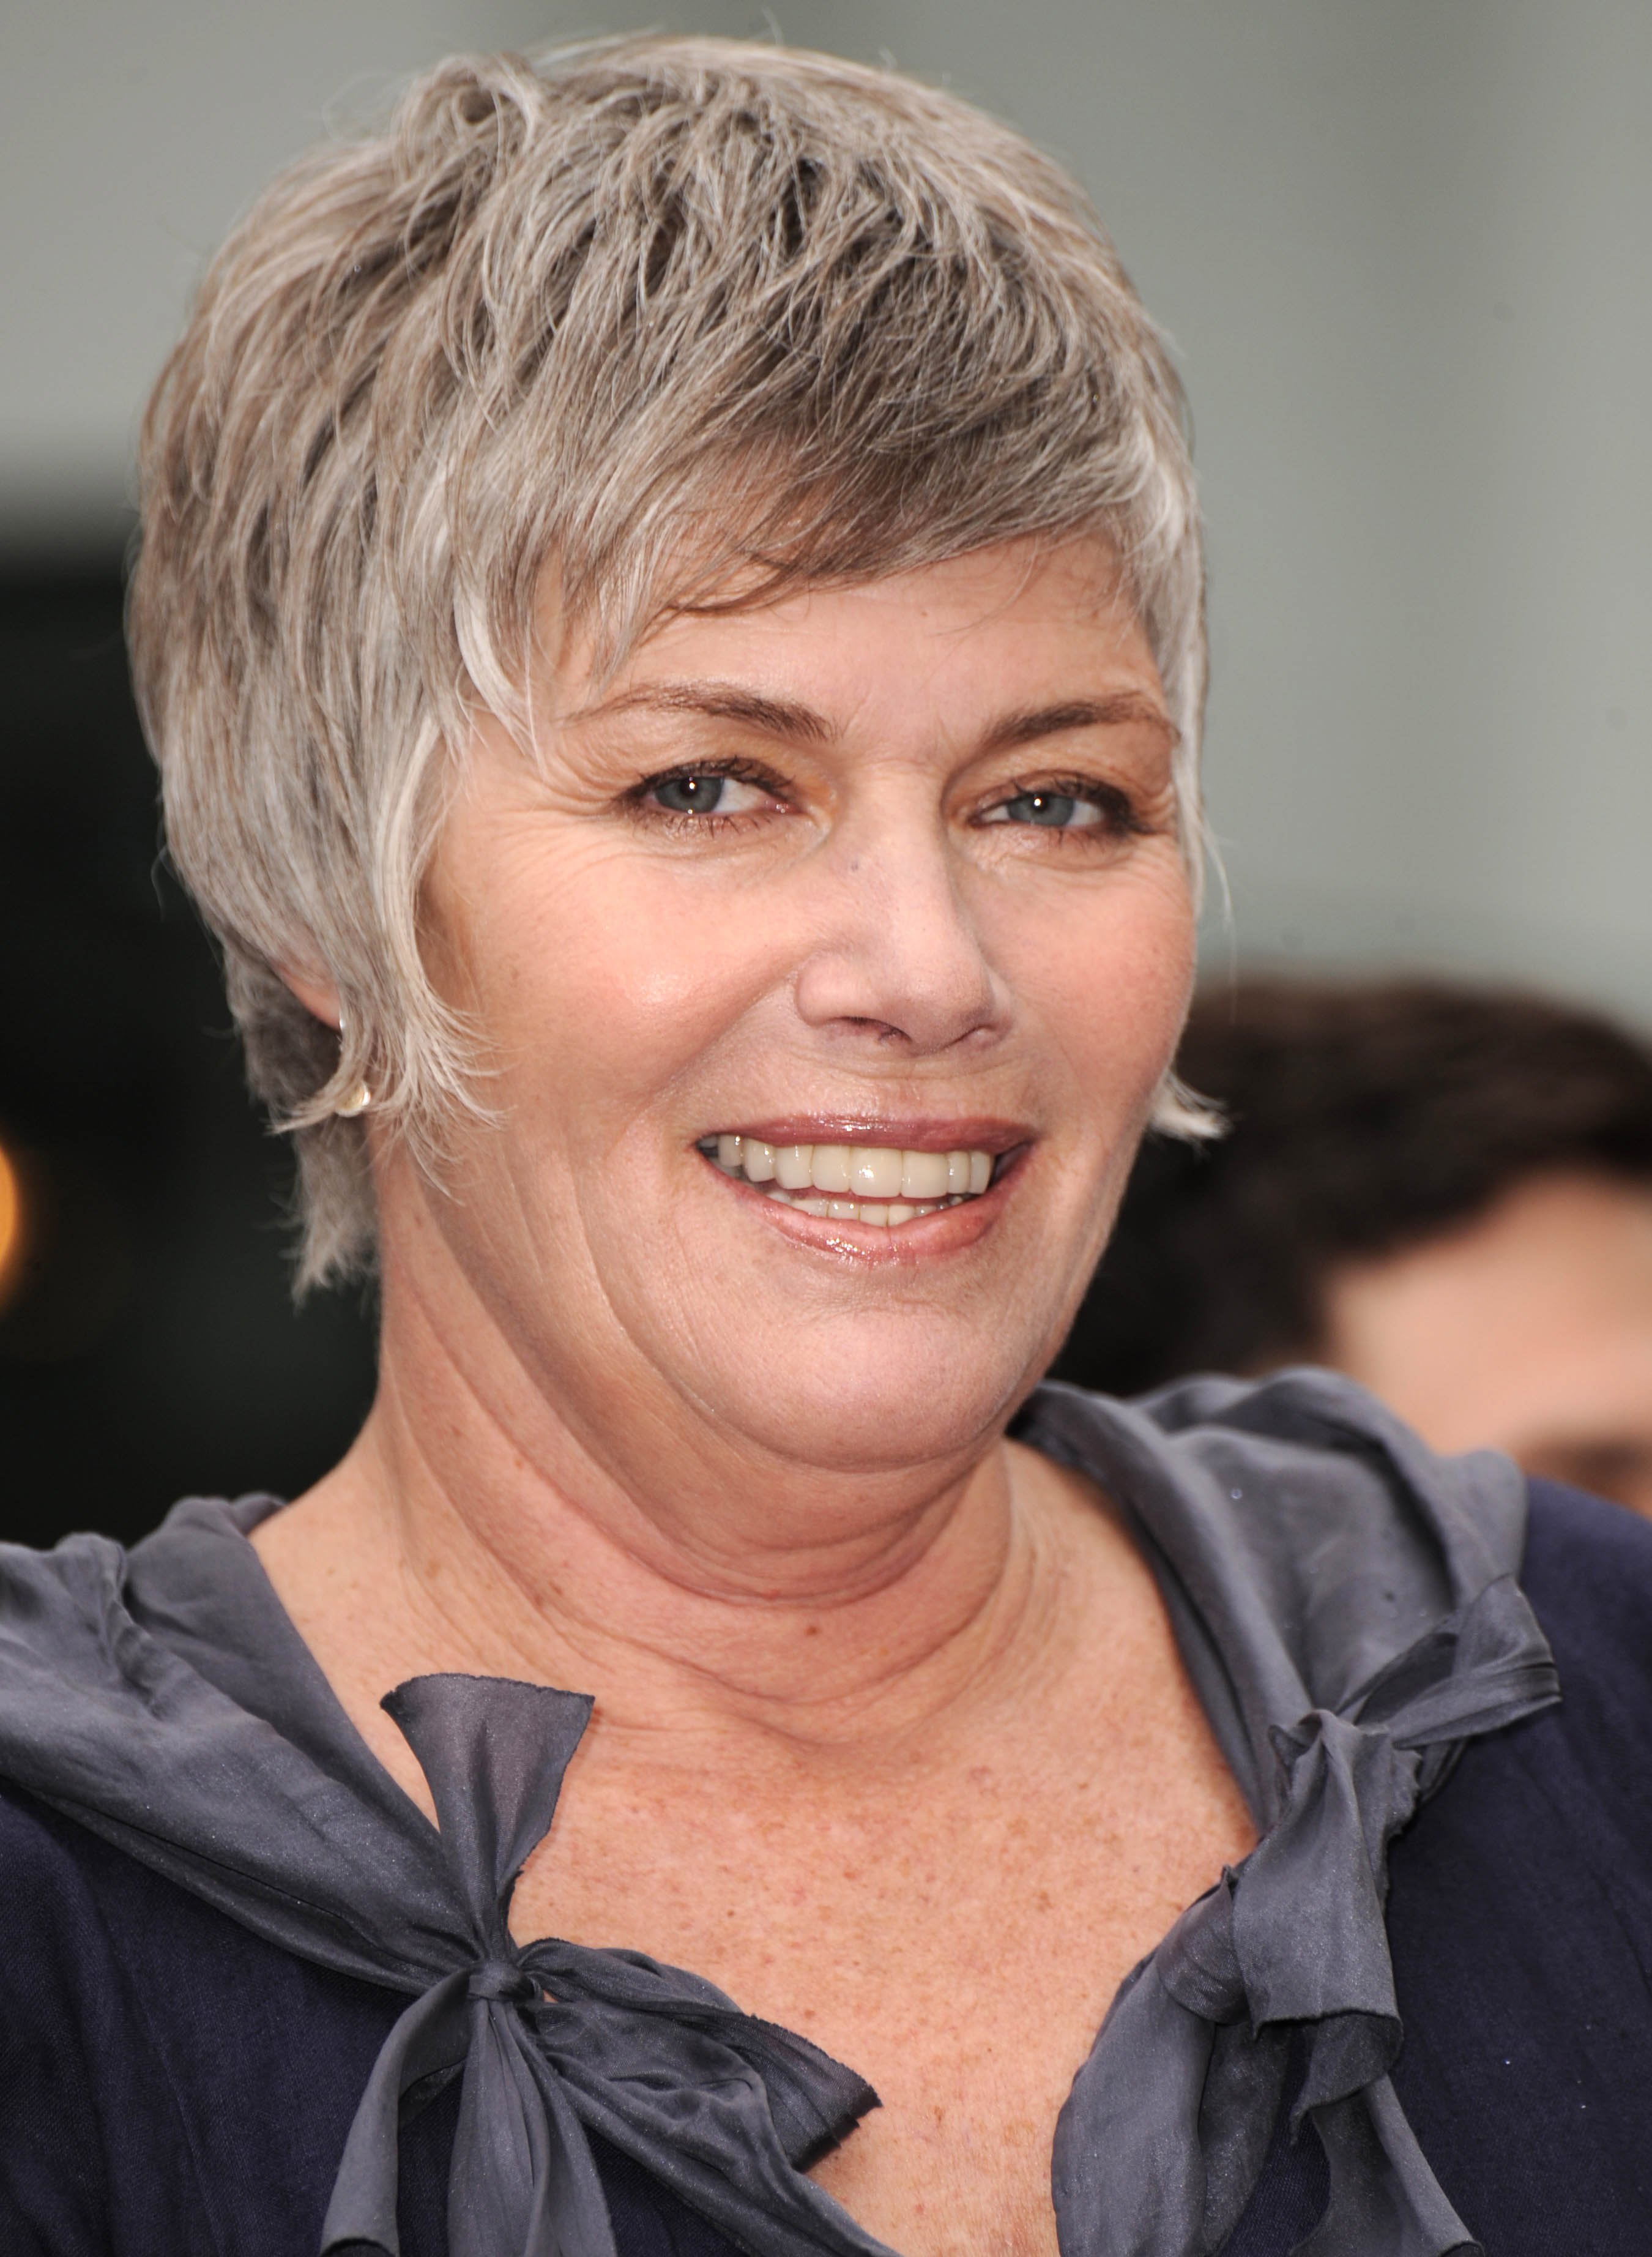 Kelly McGillis at the Jerry Bruckheimer Hand And Footprint Ceremony on May 17, 2010 in Hollywood | Source: Getty Images